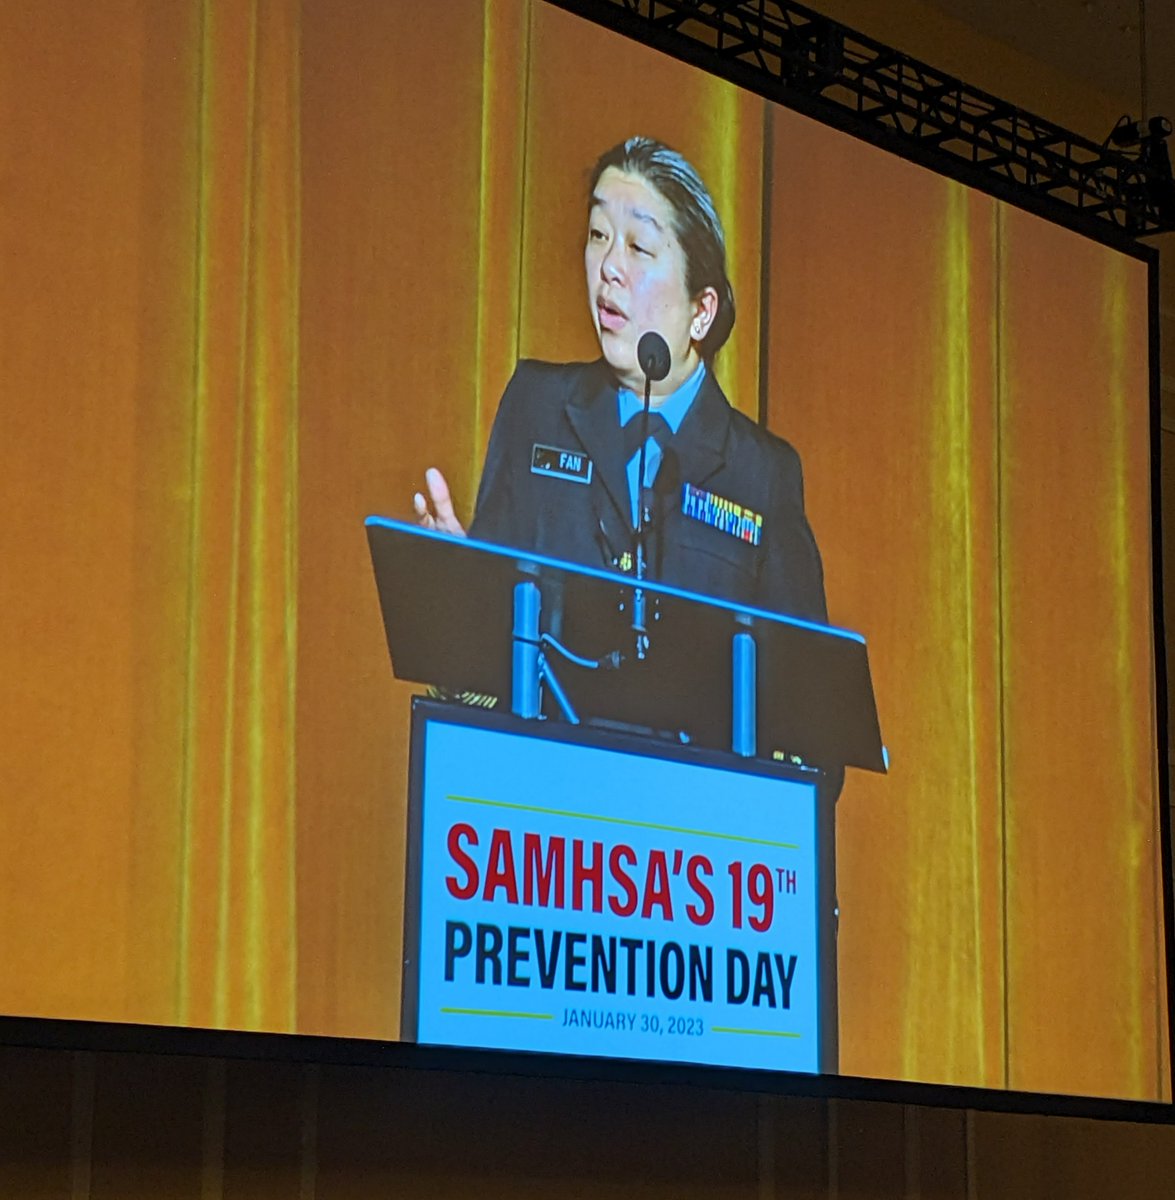 'Nothing beats working with people who care about #prevention.' Cpt. Jennifer Fan, @samhsagov's acting director of CSAP. Opening remarks at #PreventionDay. We're here, and we're presenting this morning at 11:15 a.m. ET. Come see us or stop by our booth!